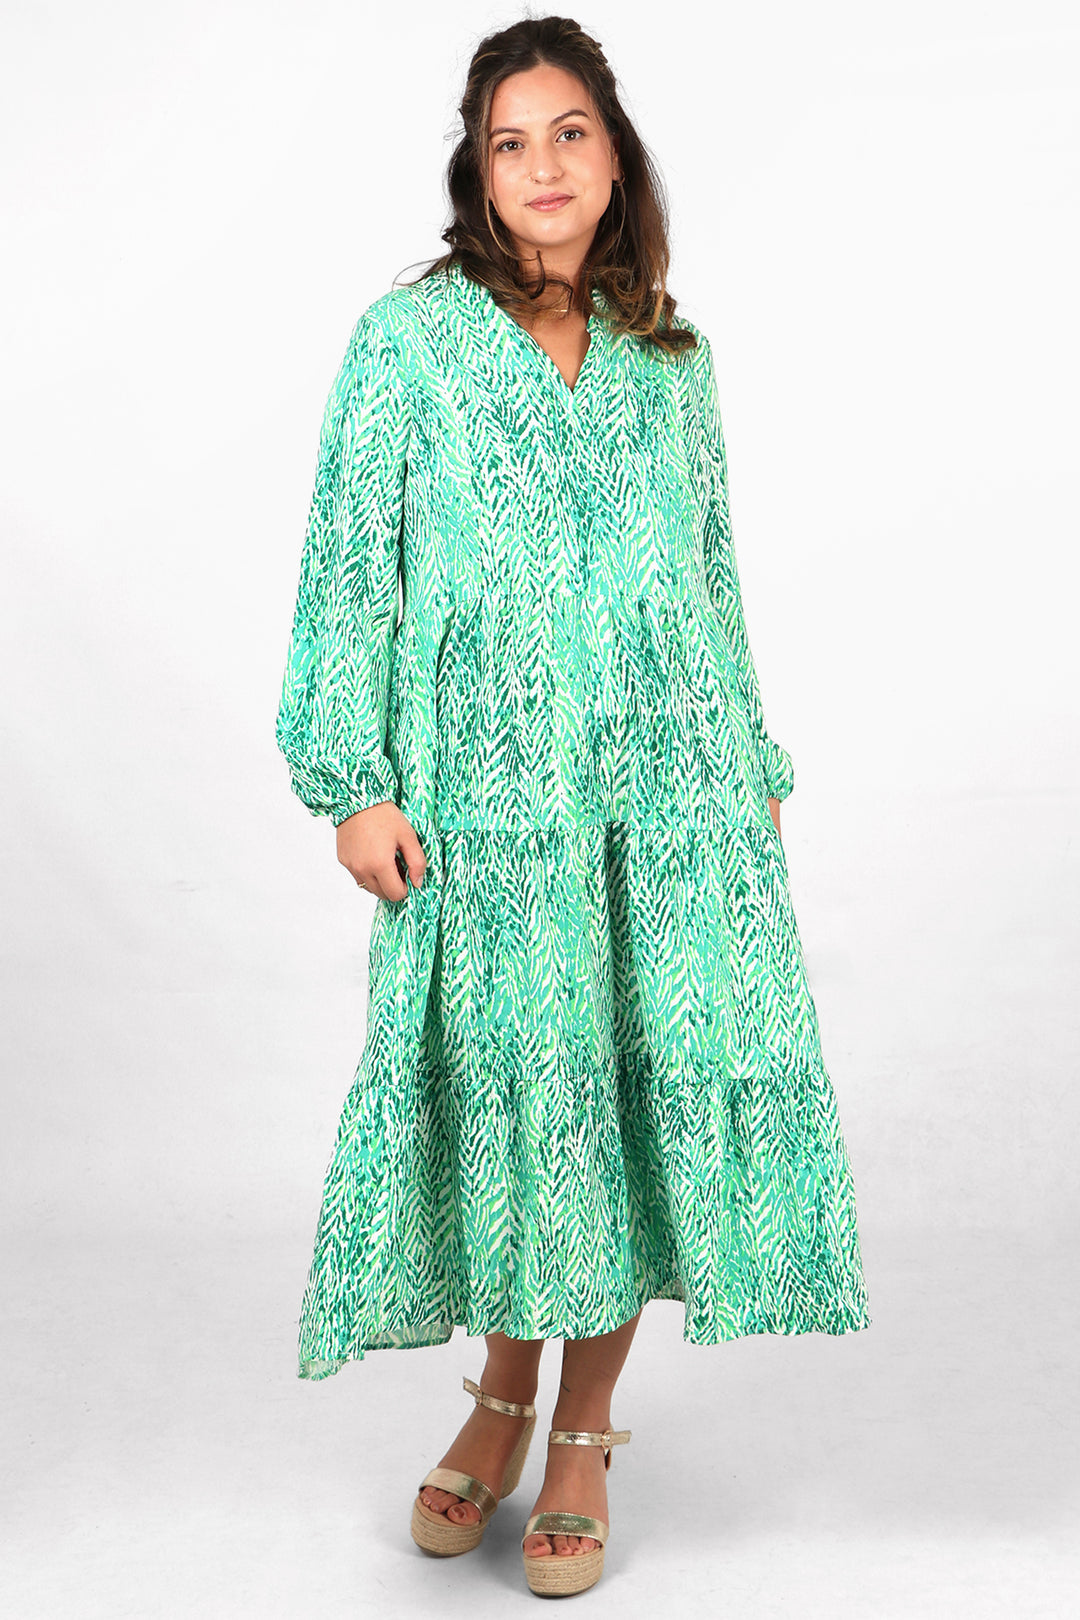 model wearing a midi length tiered dress with long sleeves and an all over green painted chevron print pattern